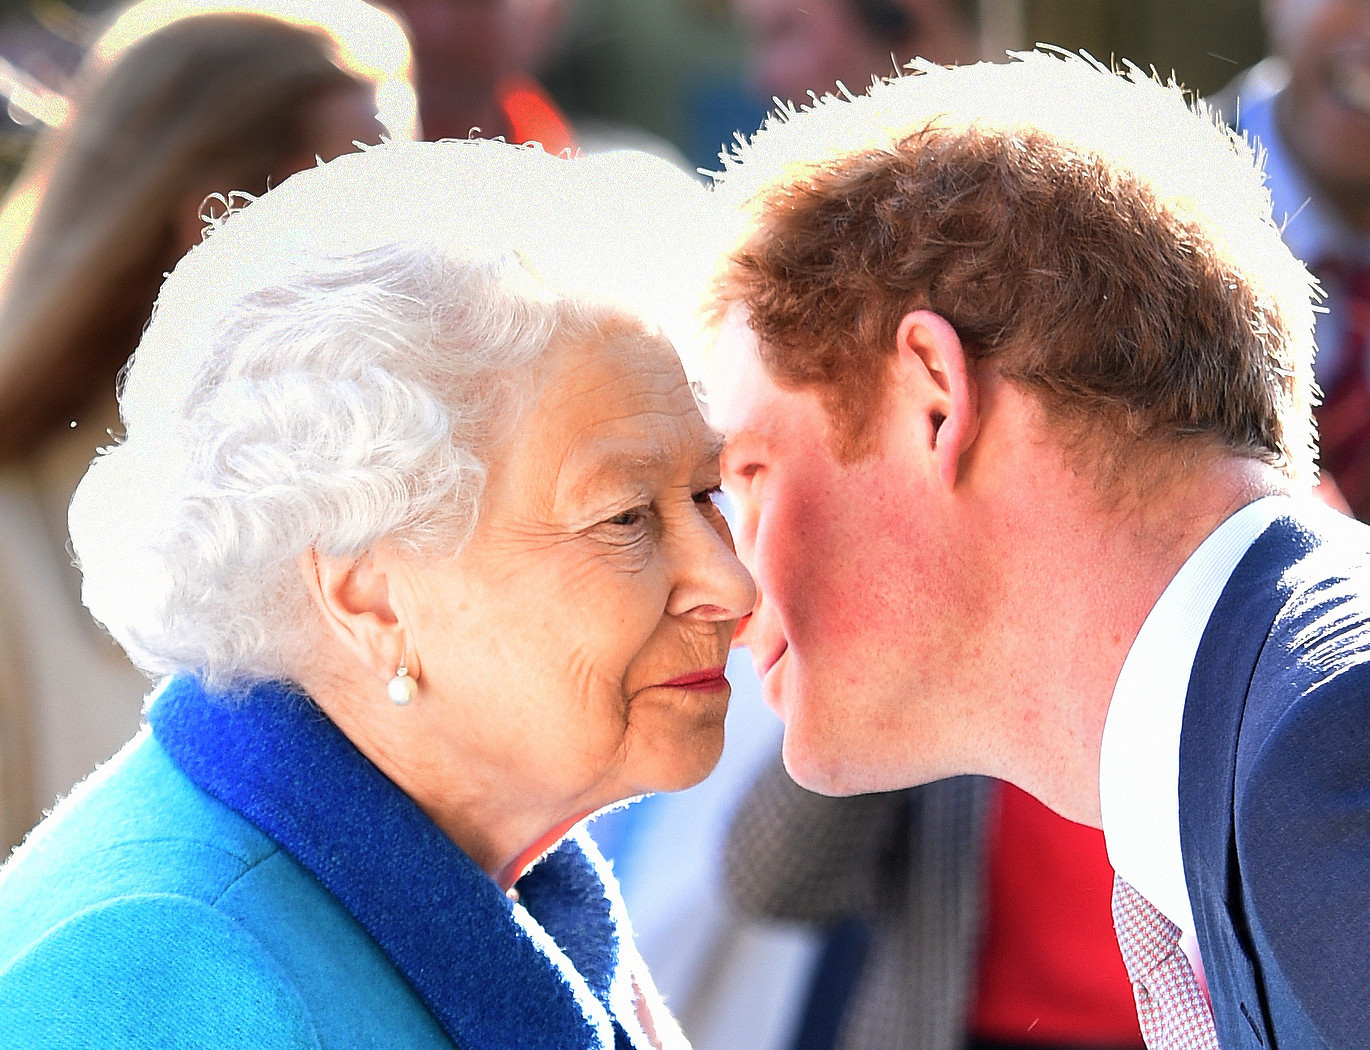 The Queen held peace talks with Prince Harry at Windsor Castle to talk about his future